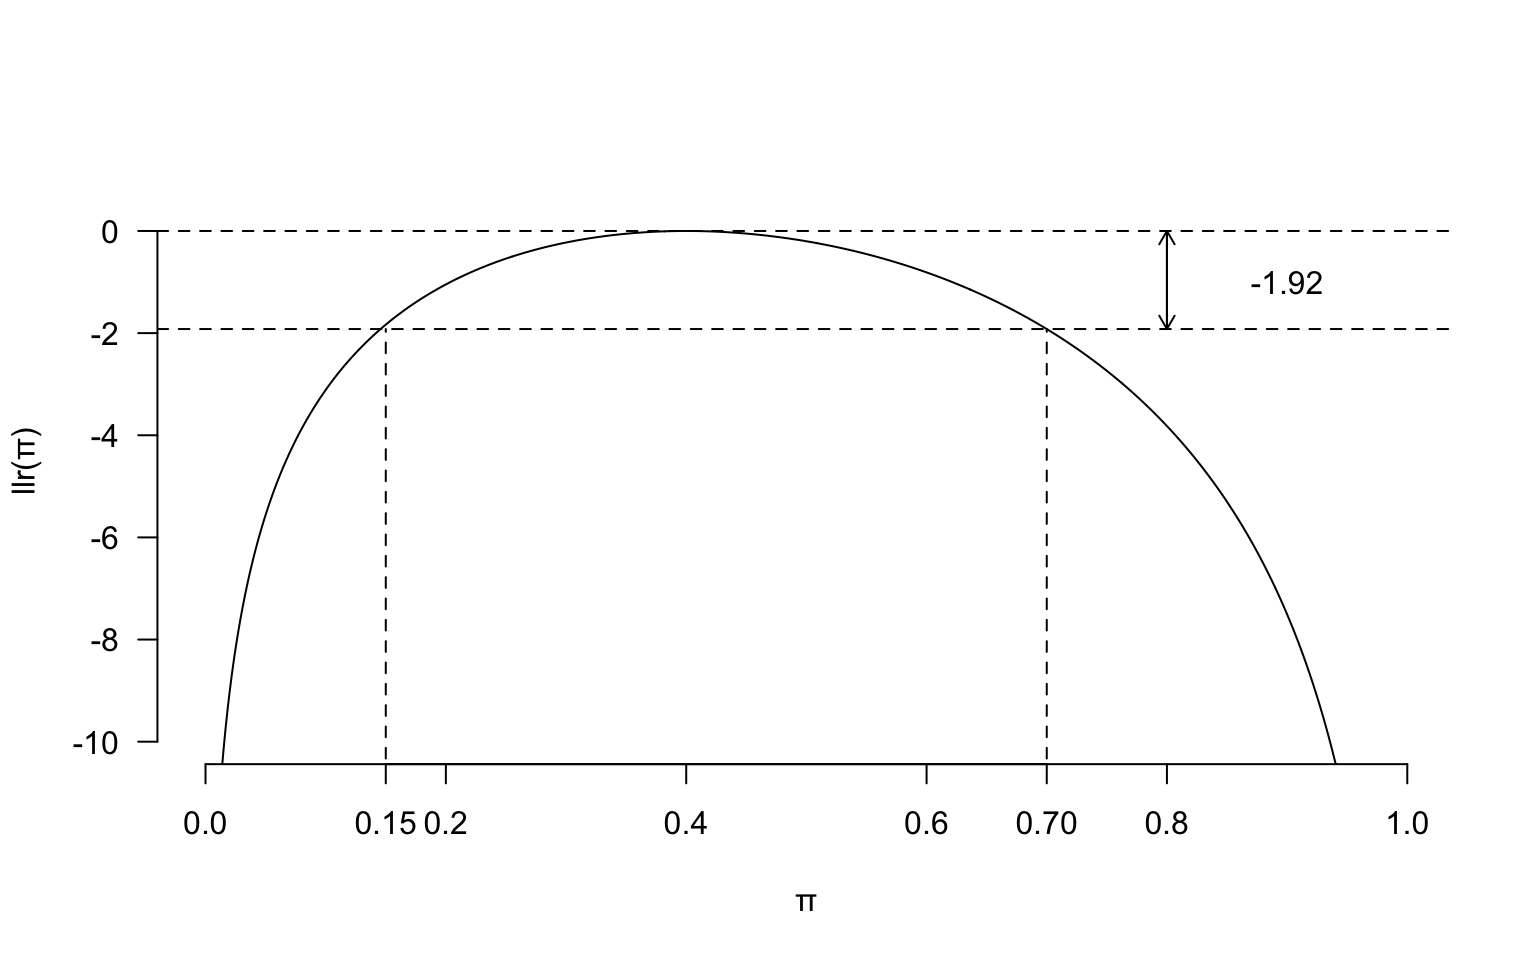 Log-likelihood ratio for binomial example, with 95% confidence intervals shown